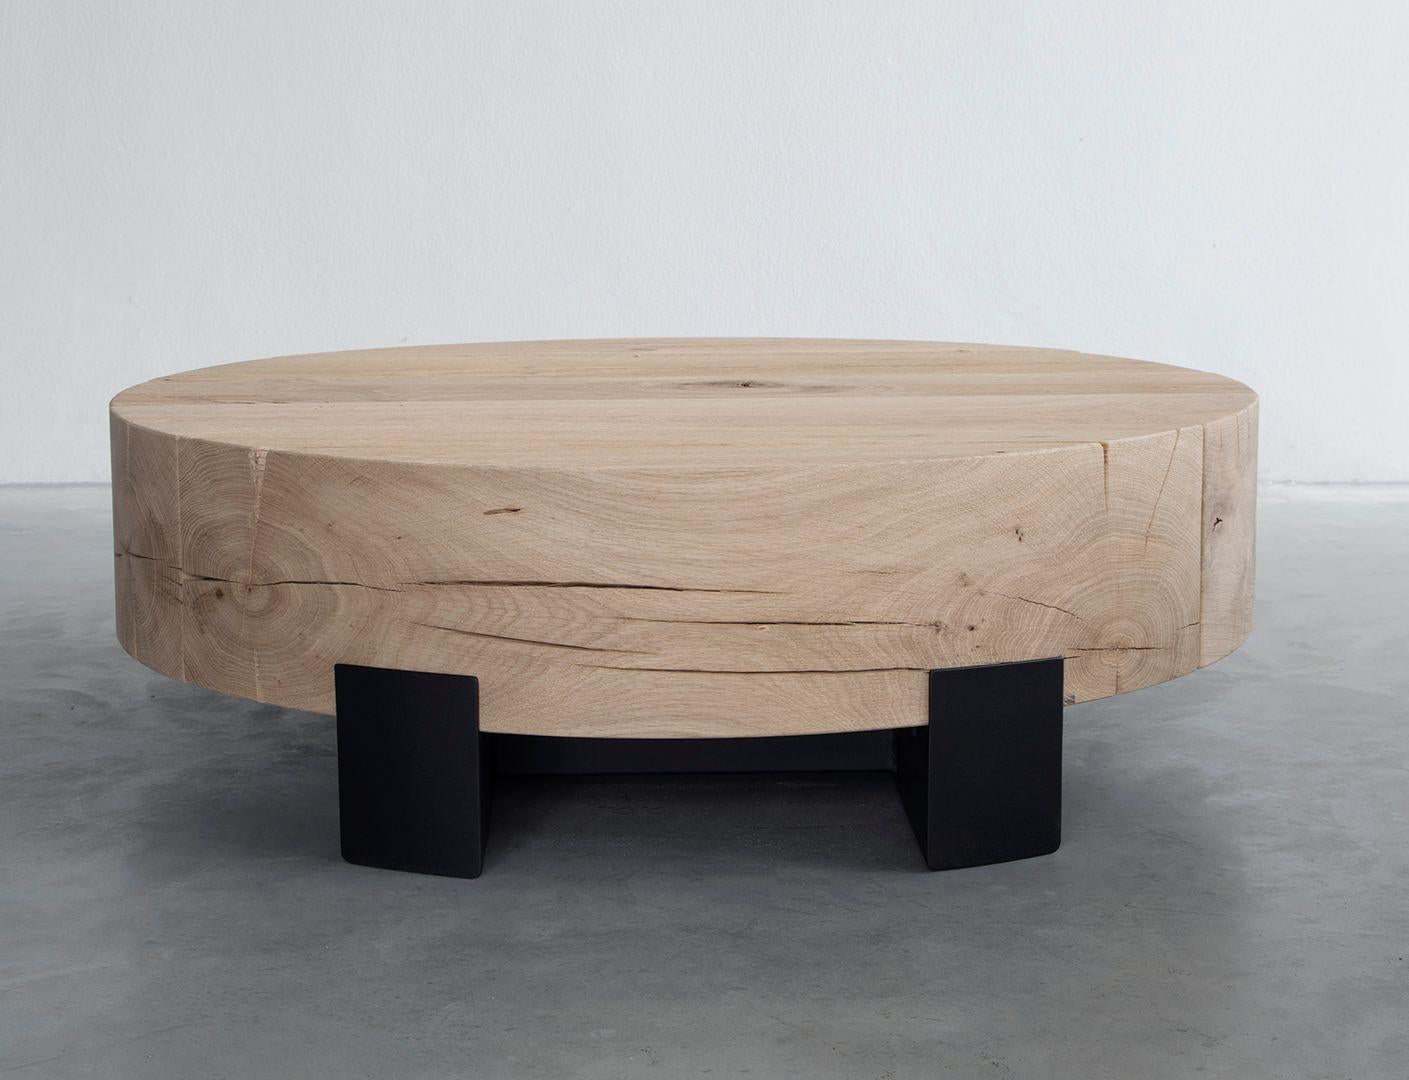 Beam round coffee table by Van Rossum
Dimensions: D91 x W91 x H28 cm
Materials: Oak, Steel.
Limited to fifty pieces.

The wood is available in all standard Van Rossum colors, or in a matching finish to customers’ own sample.
Detailing is